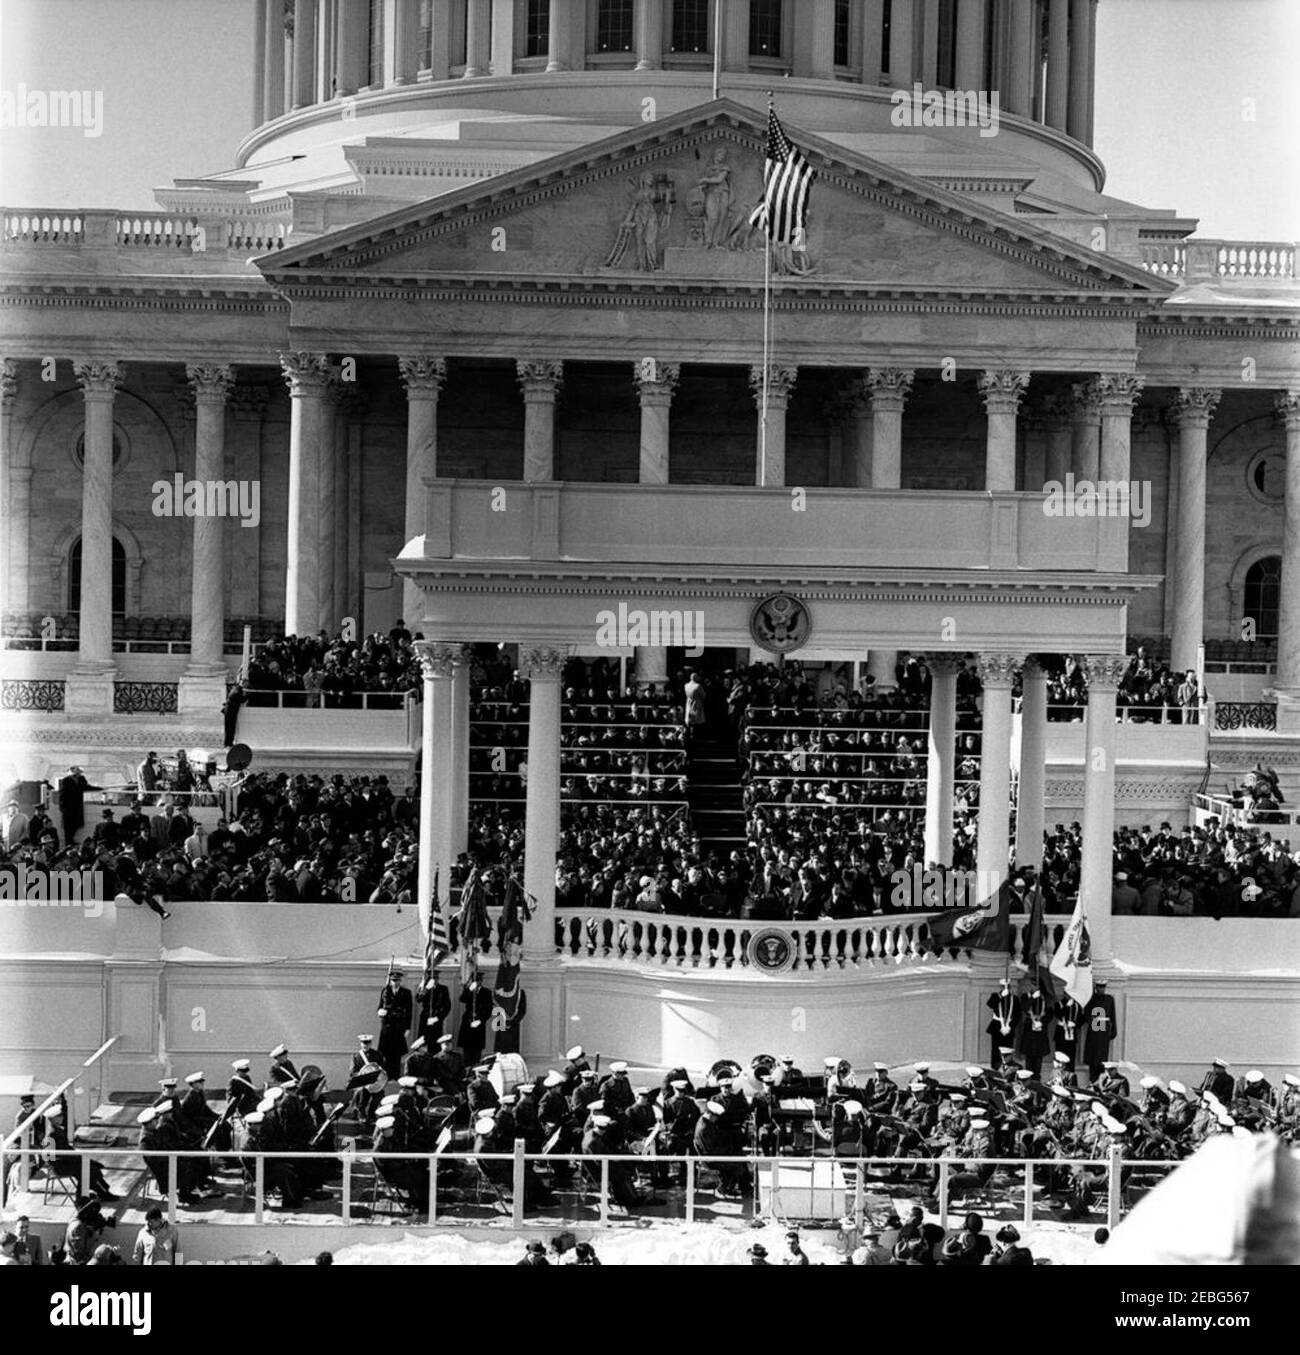 Inaugural ceremonies at U.S. Capitol, and Inaugural Parade. Inauguration of John F. Kennedy at East Portico, United States Capitol Building, Washington, D.C. President John F. Kennedy gives Inaugural Address. Looking on: Vice President Lyndon B. Johnson; former Vice President Richard M. Nixon; former President Harry S. Truman; former First Lady Bess Truman; former President Dwight D. Eisenhower; former First Lady Mamie Eisenhower; First Lady Jacqueline Kennedy; Lady Bird Johnson; Joseph P. Kennedy, Sr.; and Rose Fitzgerald Kennedy. United States Marine Band on platform below Inaugural stand. Stock Photo